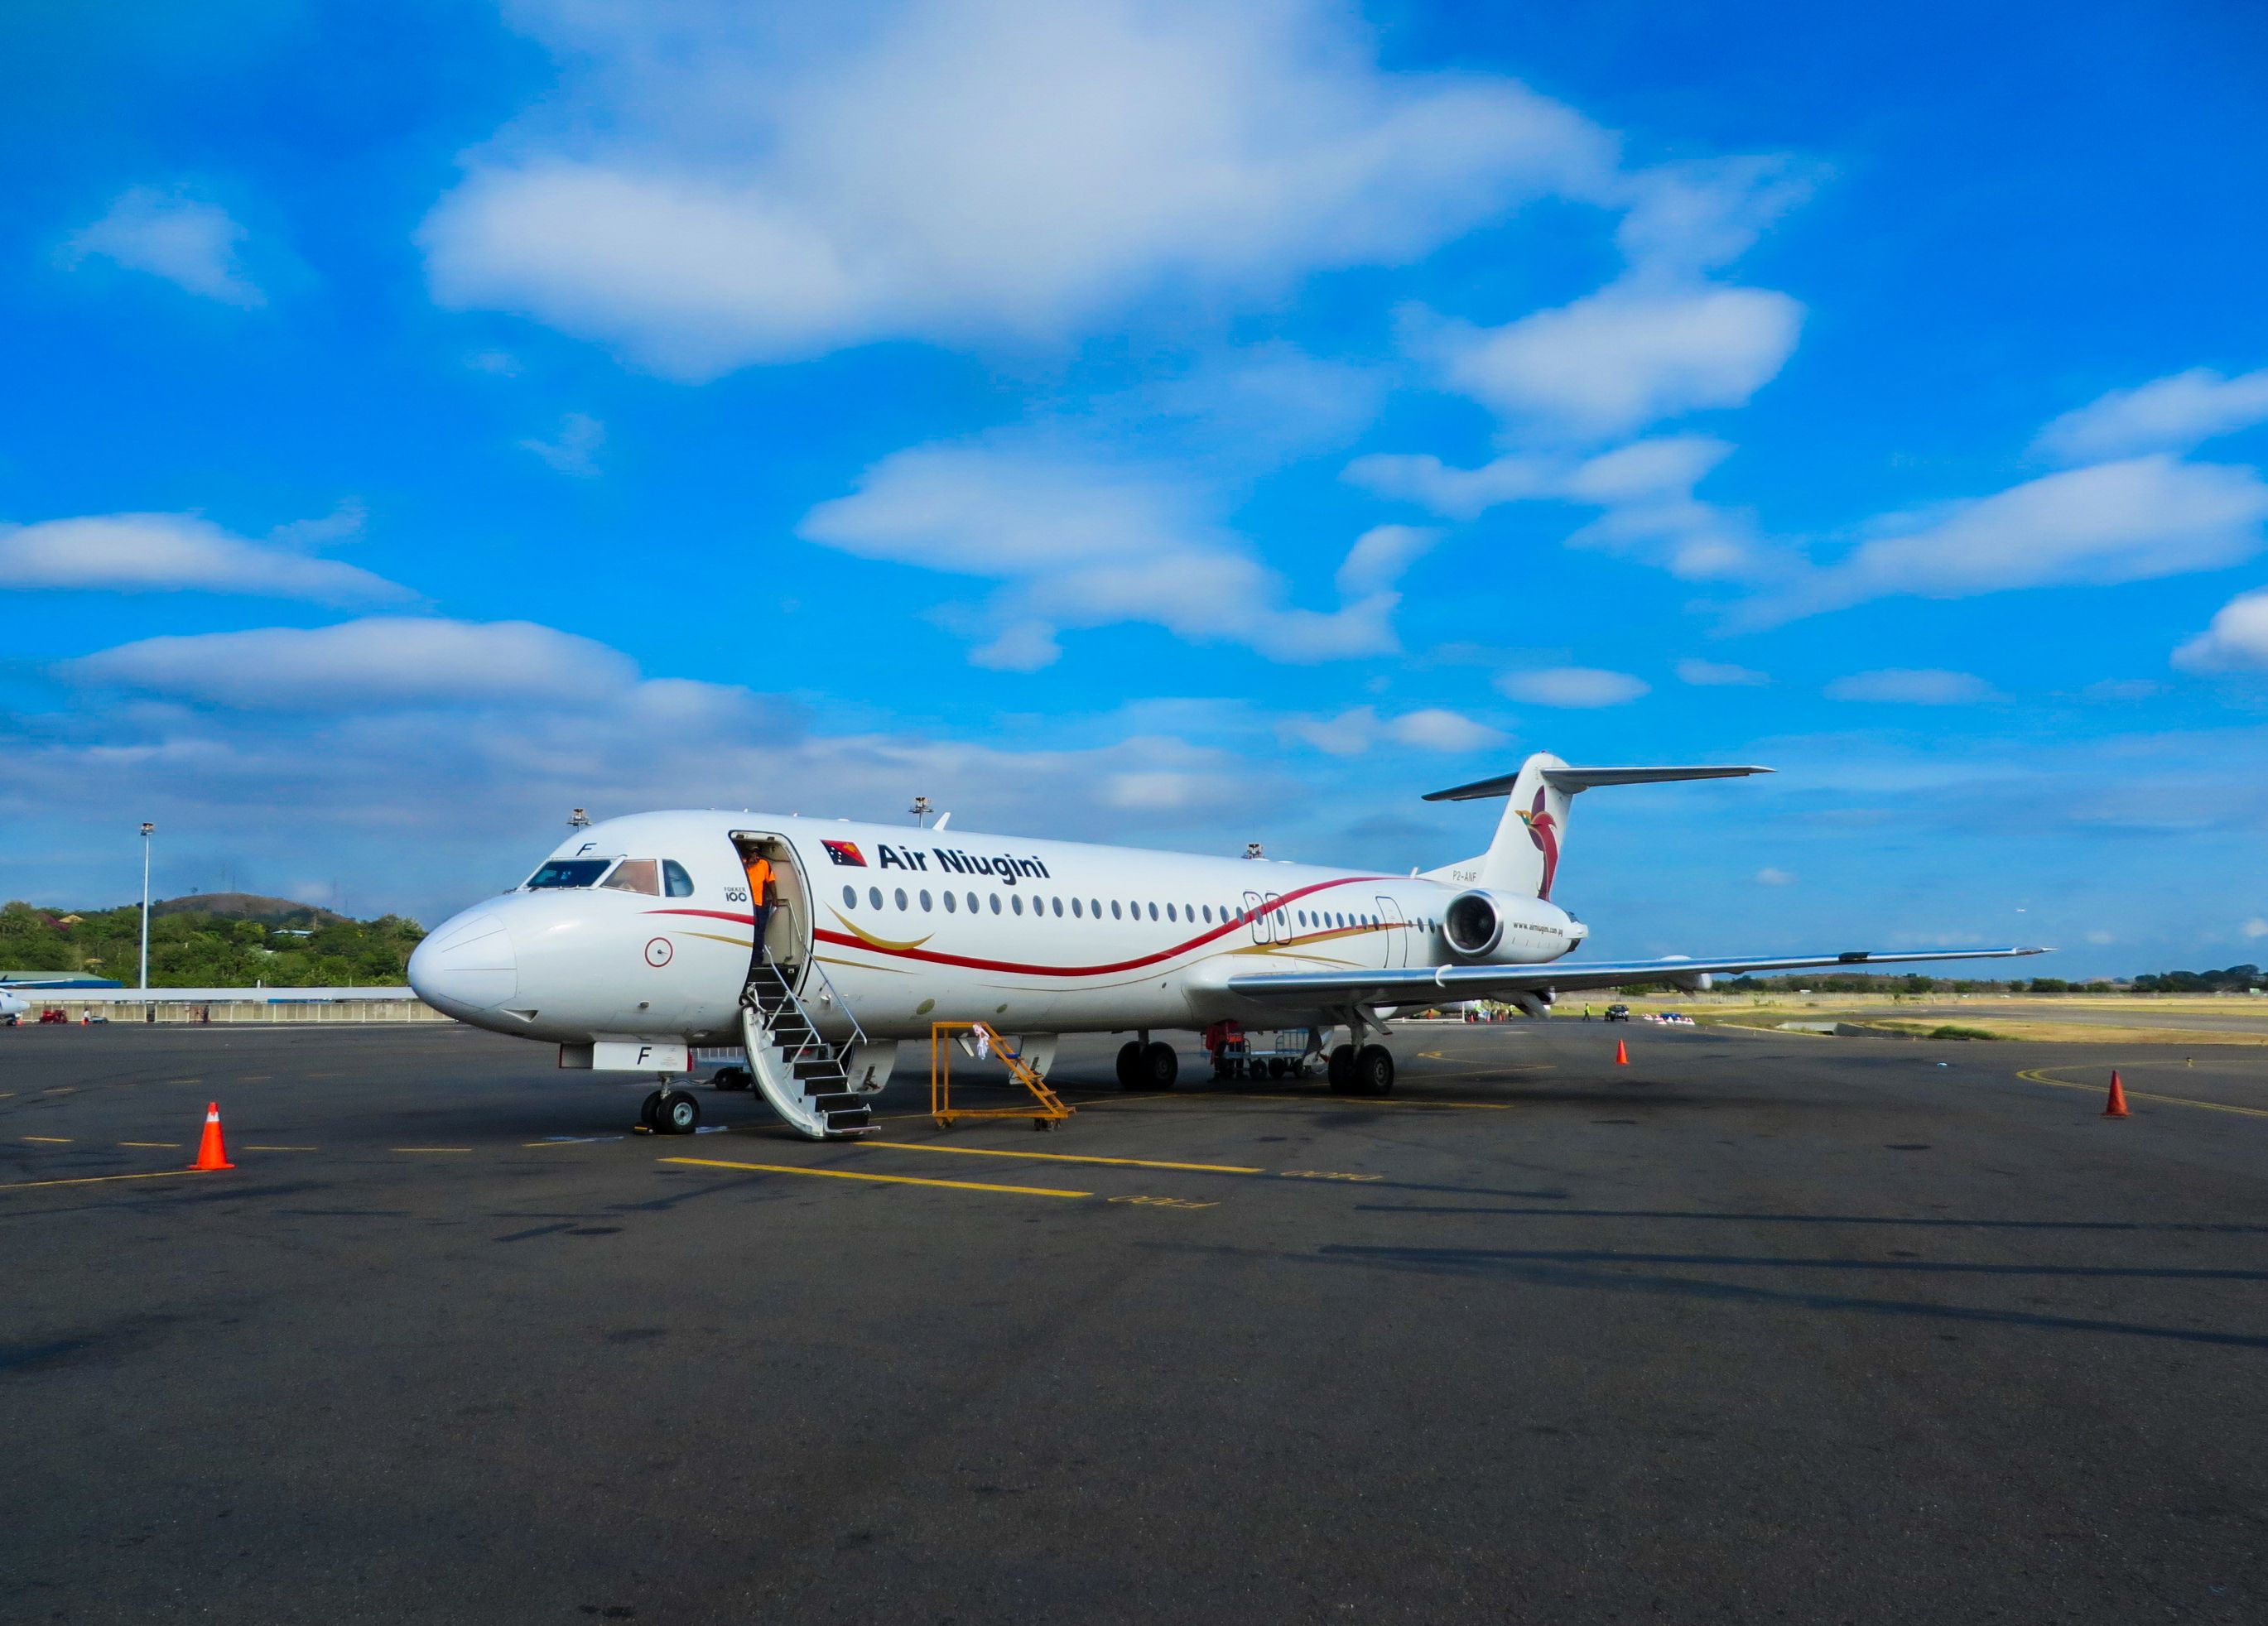 An Air Niugini Fokker 100 parked at an airport.